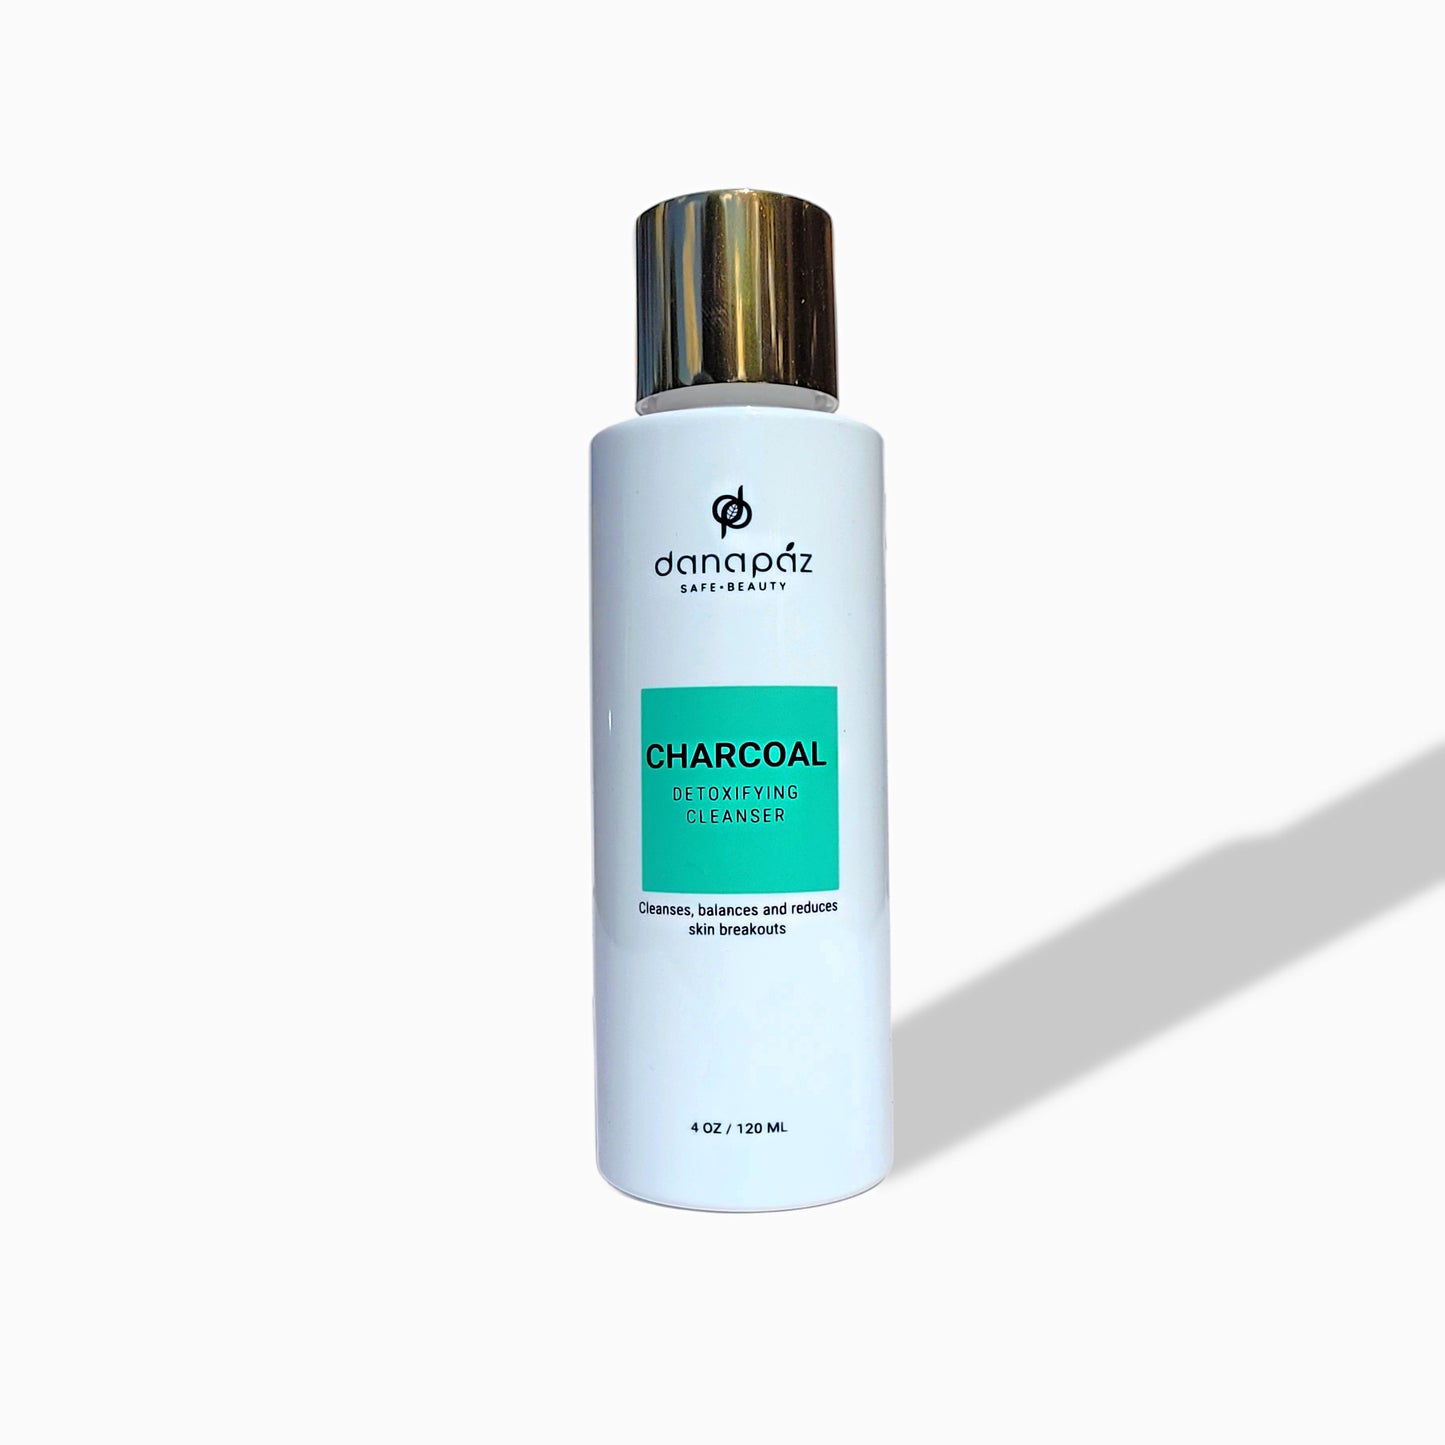 The best cleanser for oily to acne prone, sun damage, hyperpigmentation, breakouts and pimples with clean botanical extracts.